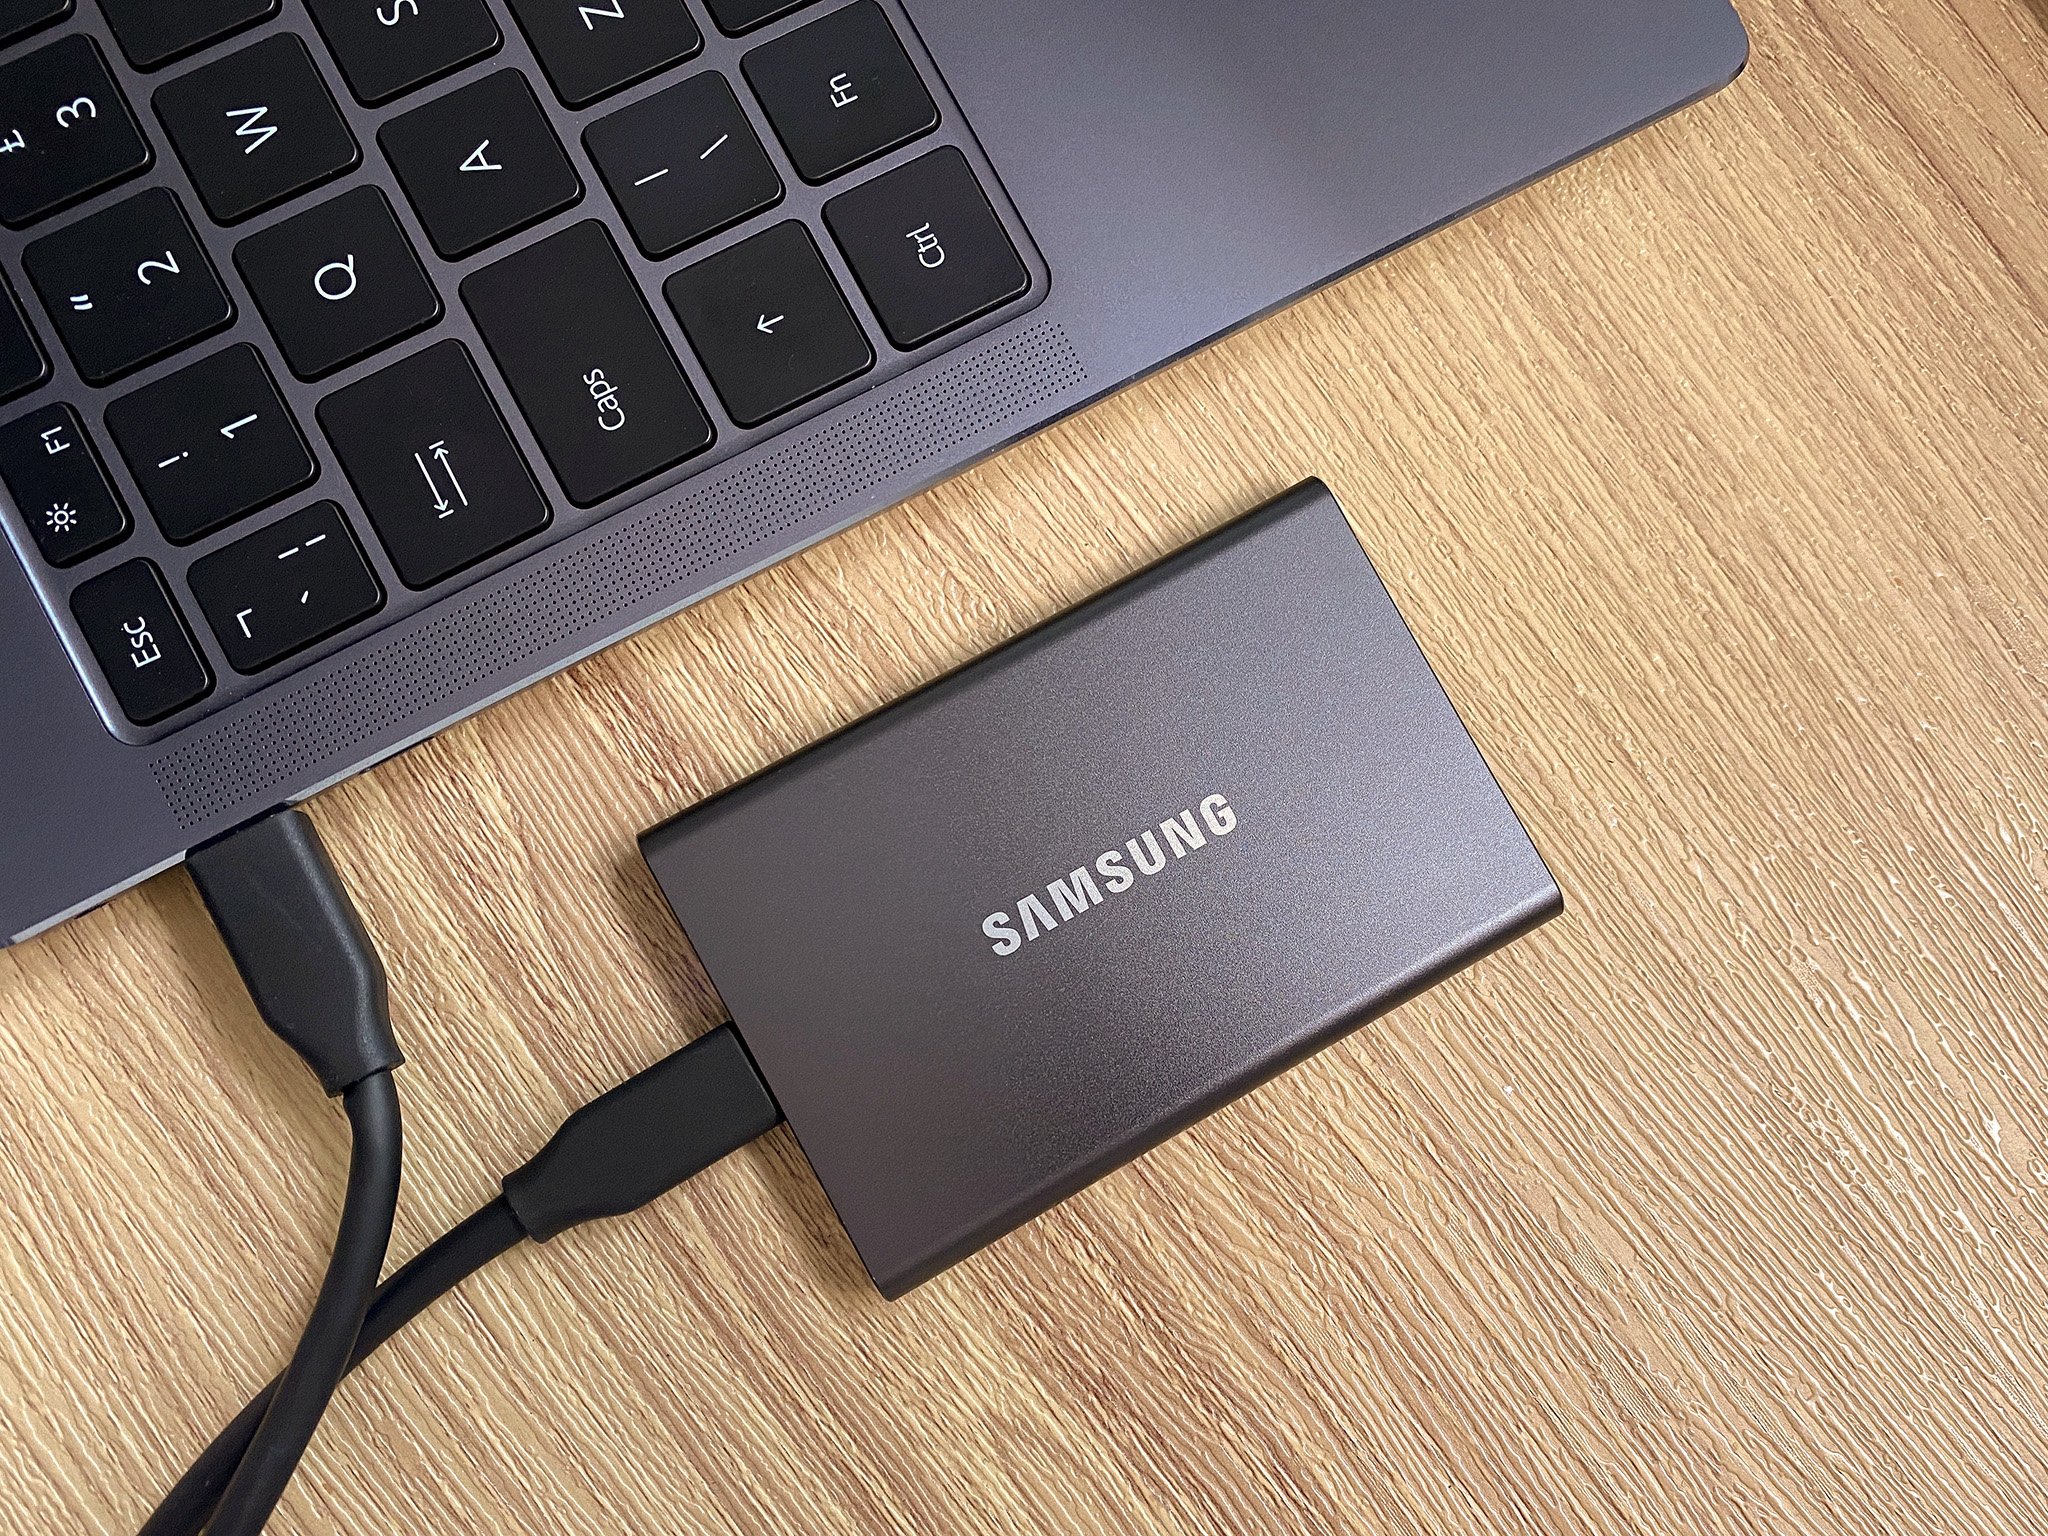 Samsung T7 Touch Review - Fingerprint Secured USB C SSD